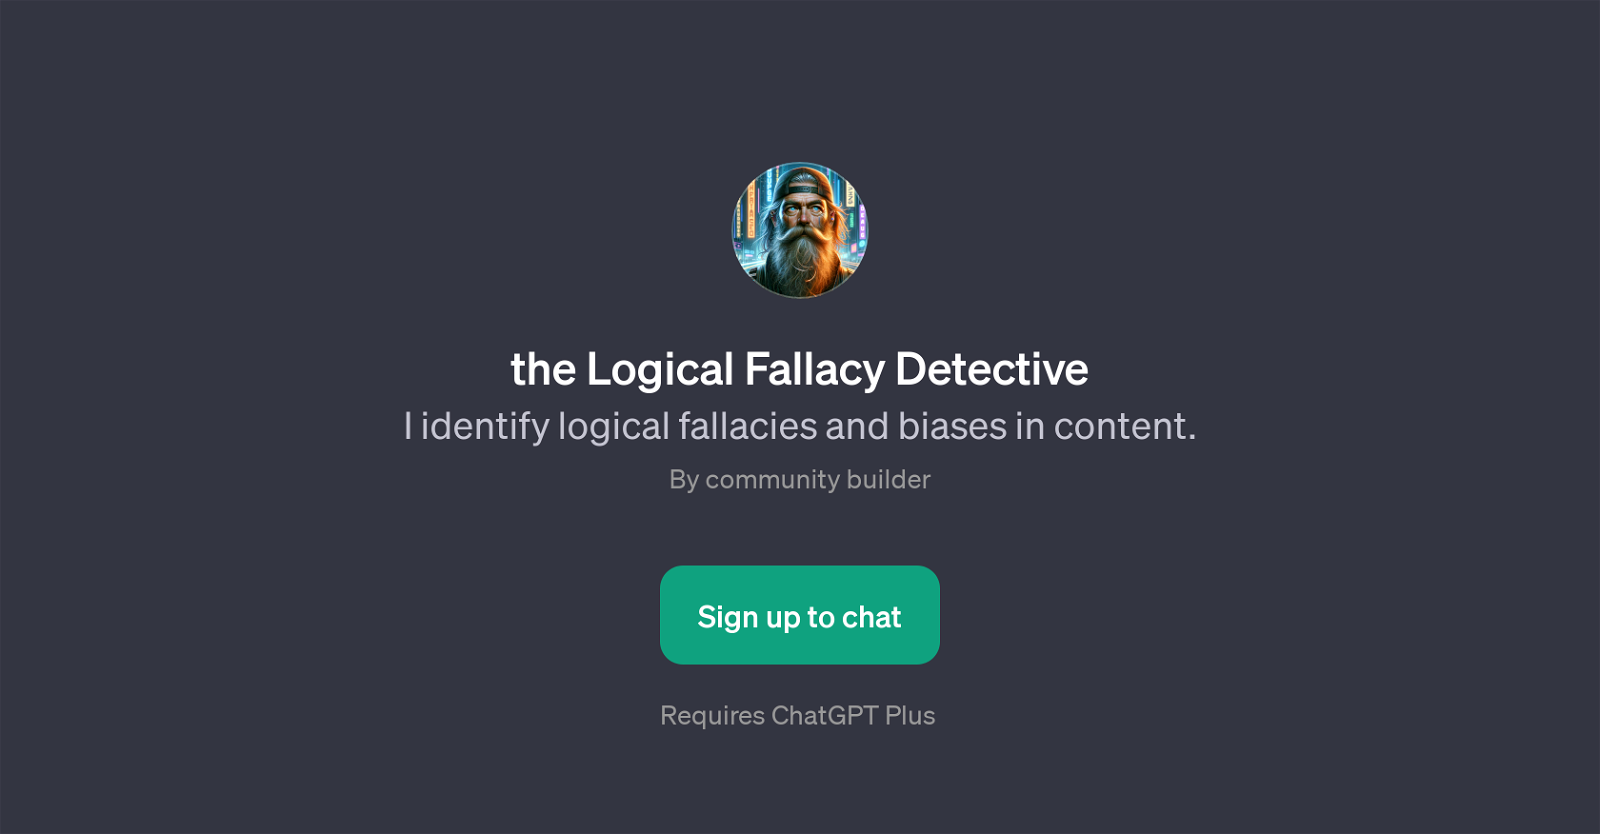 the Logical Fallacy Detective website